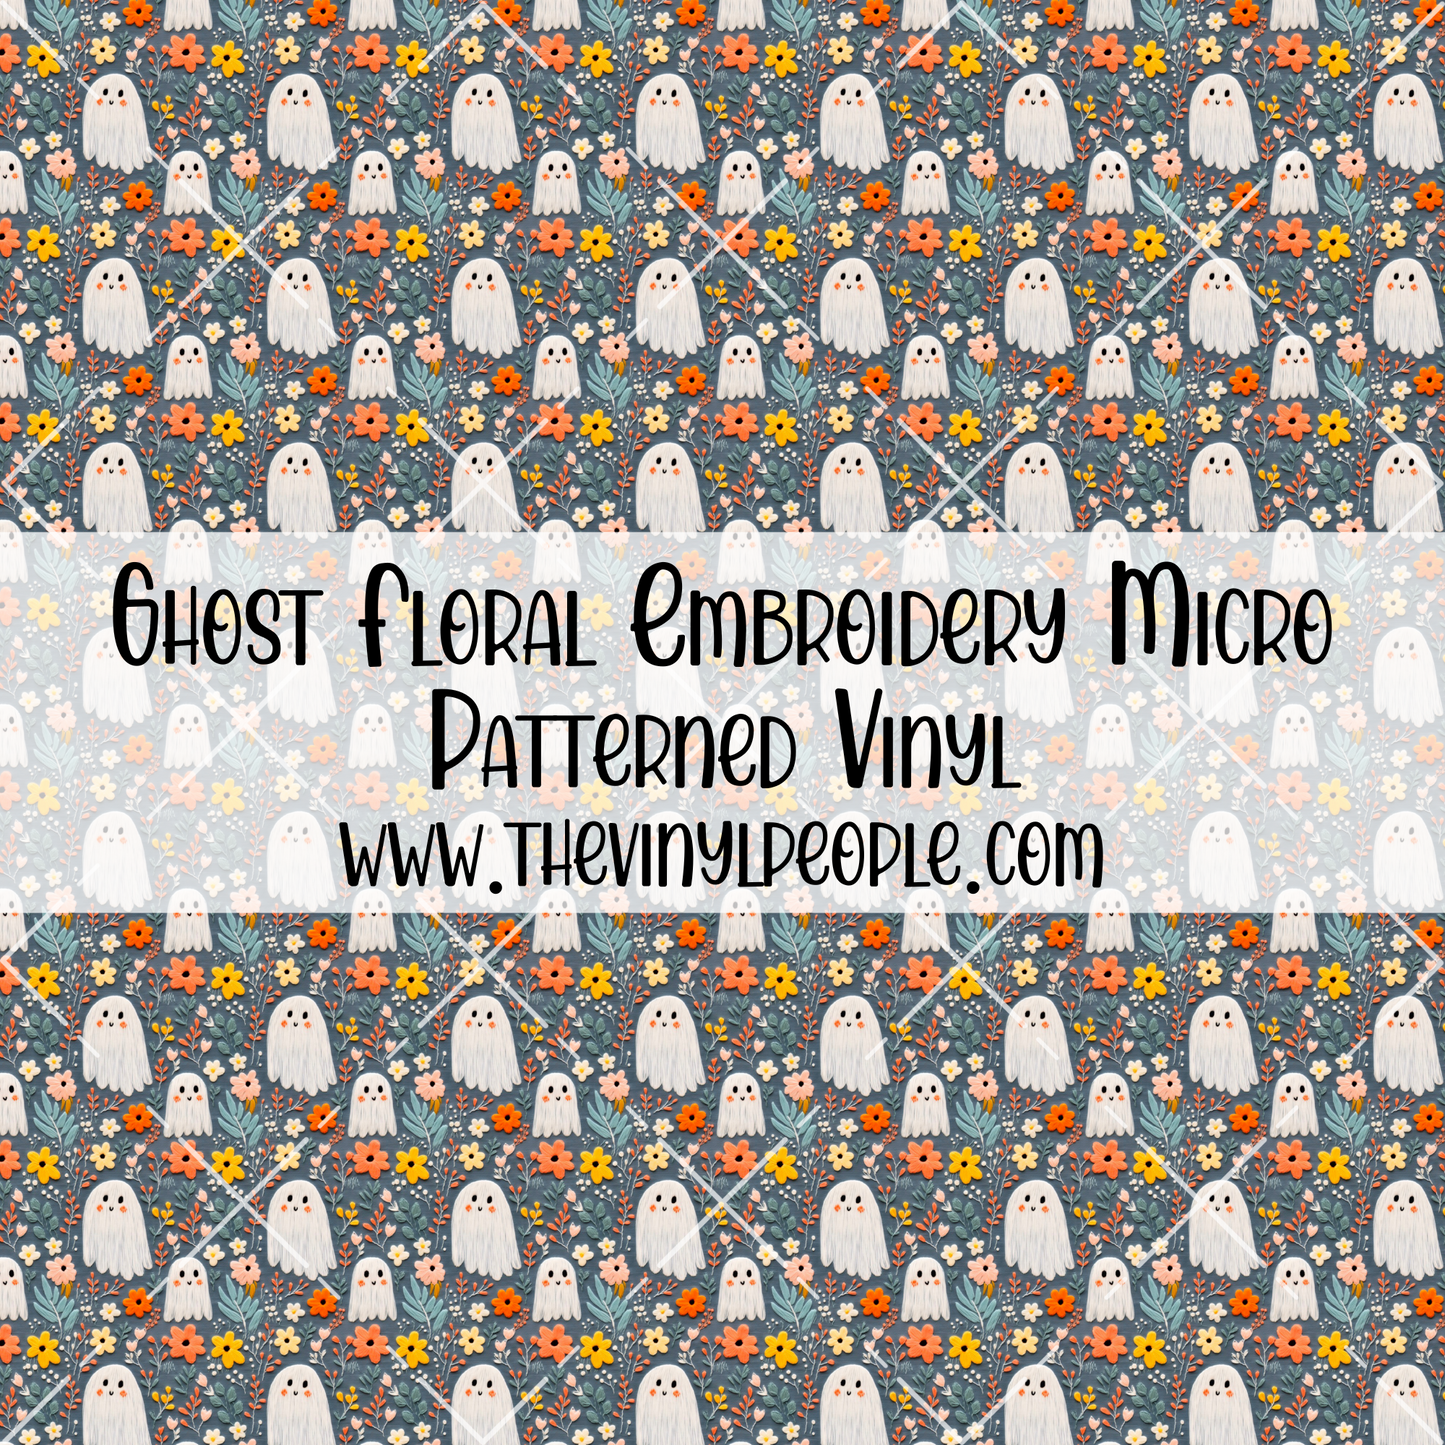 Ghost Floral Embroidery Patterned Vinyl